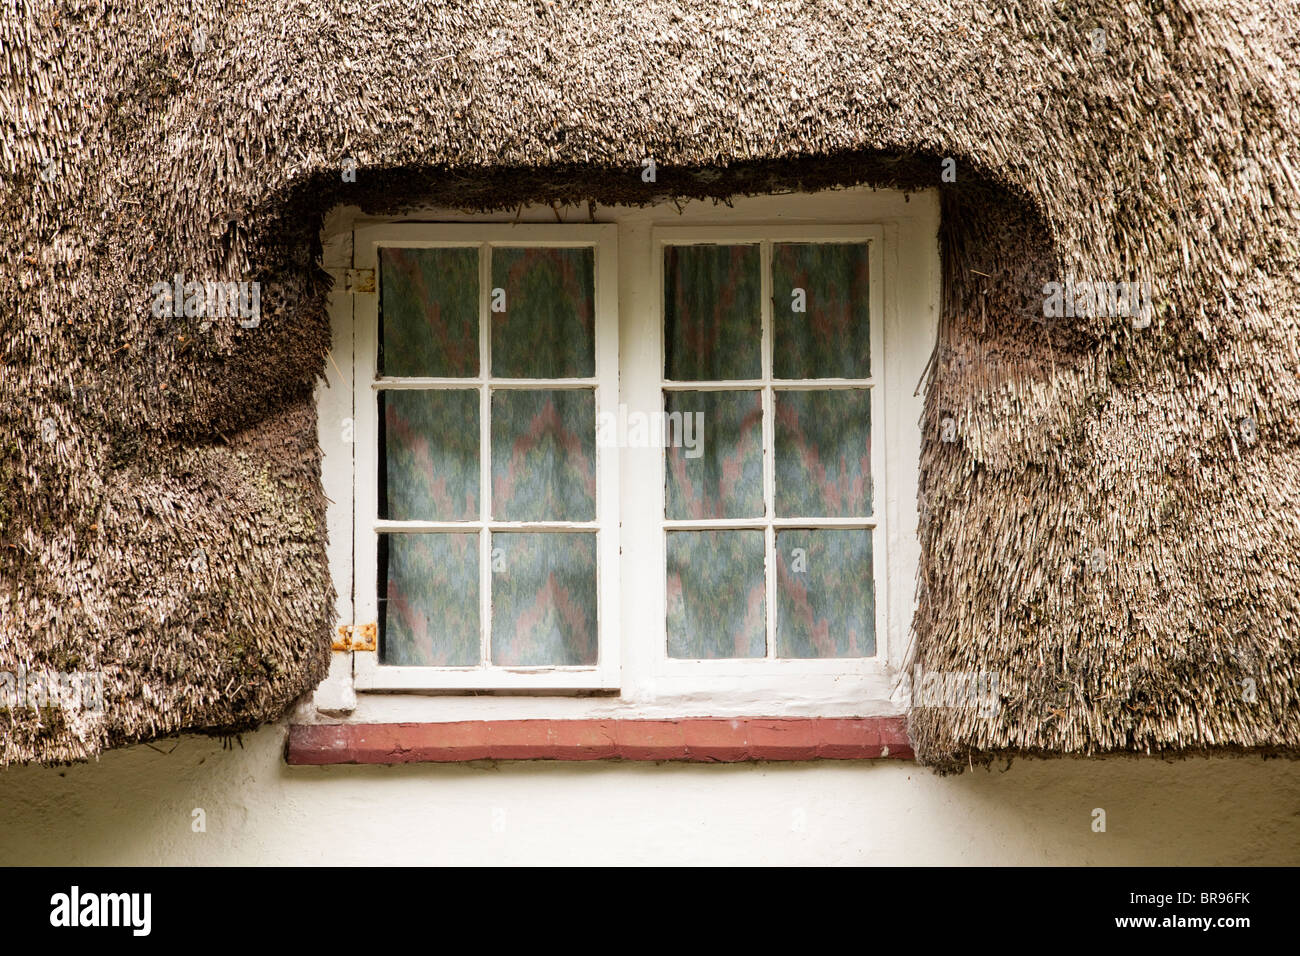 A traditional thatched roof and cottage window, Dorset, UK Stock Photo